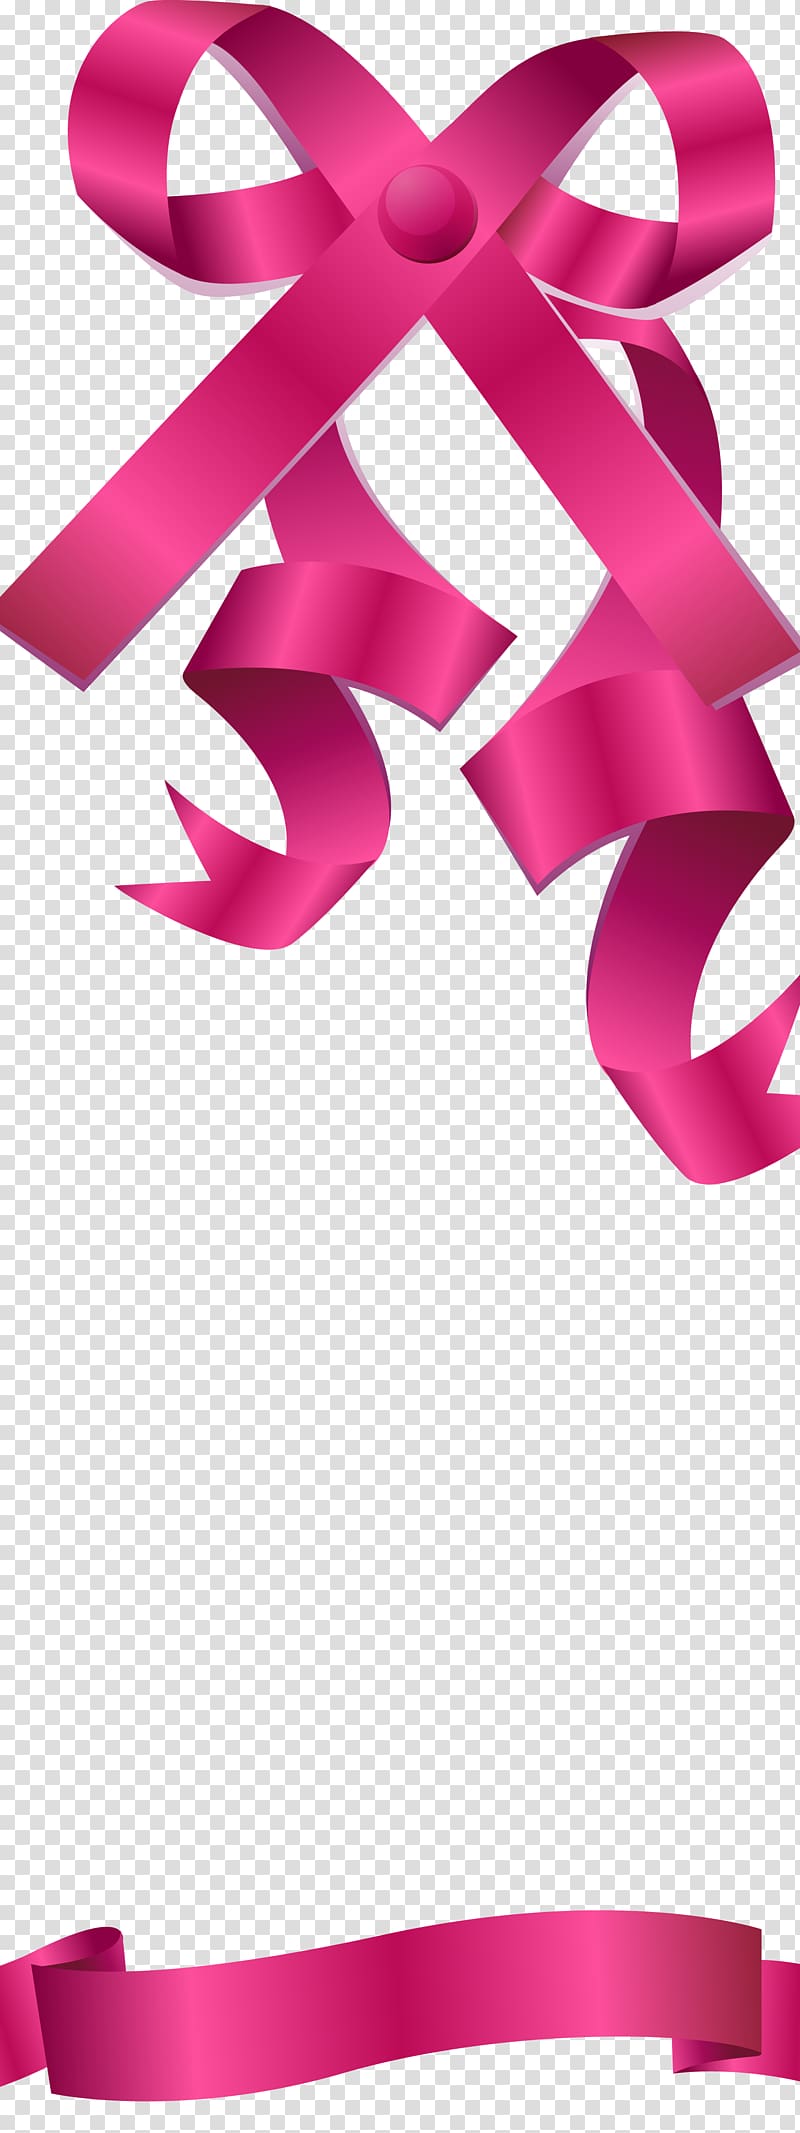 Ribbon bow transparent background PNG clipart